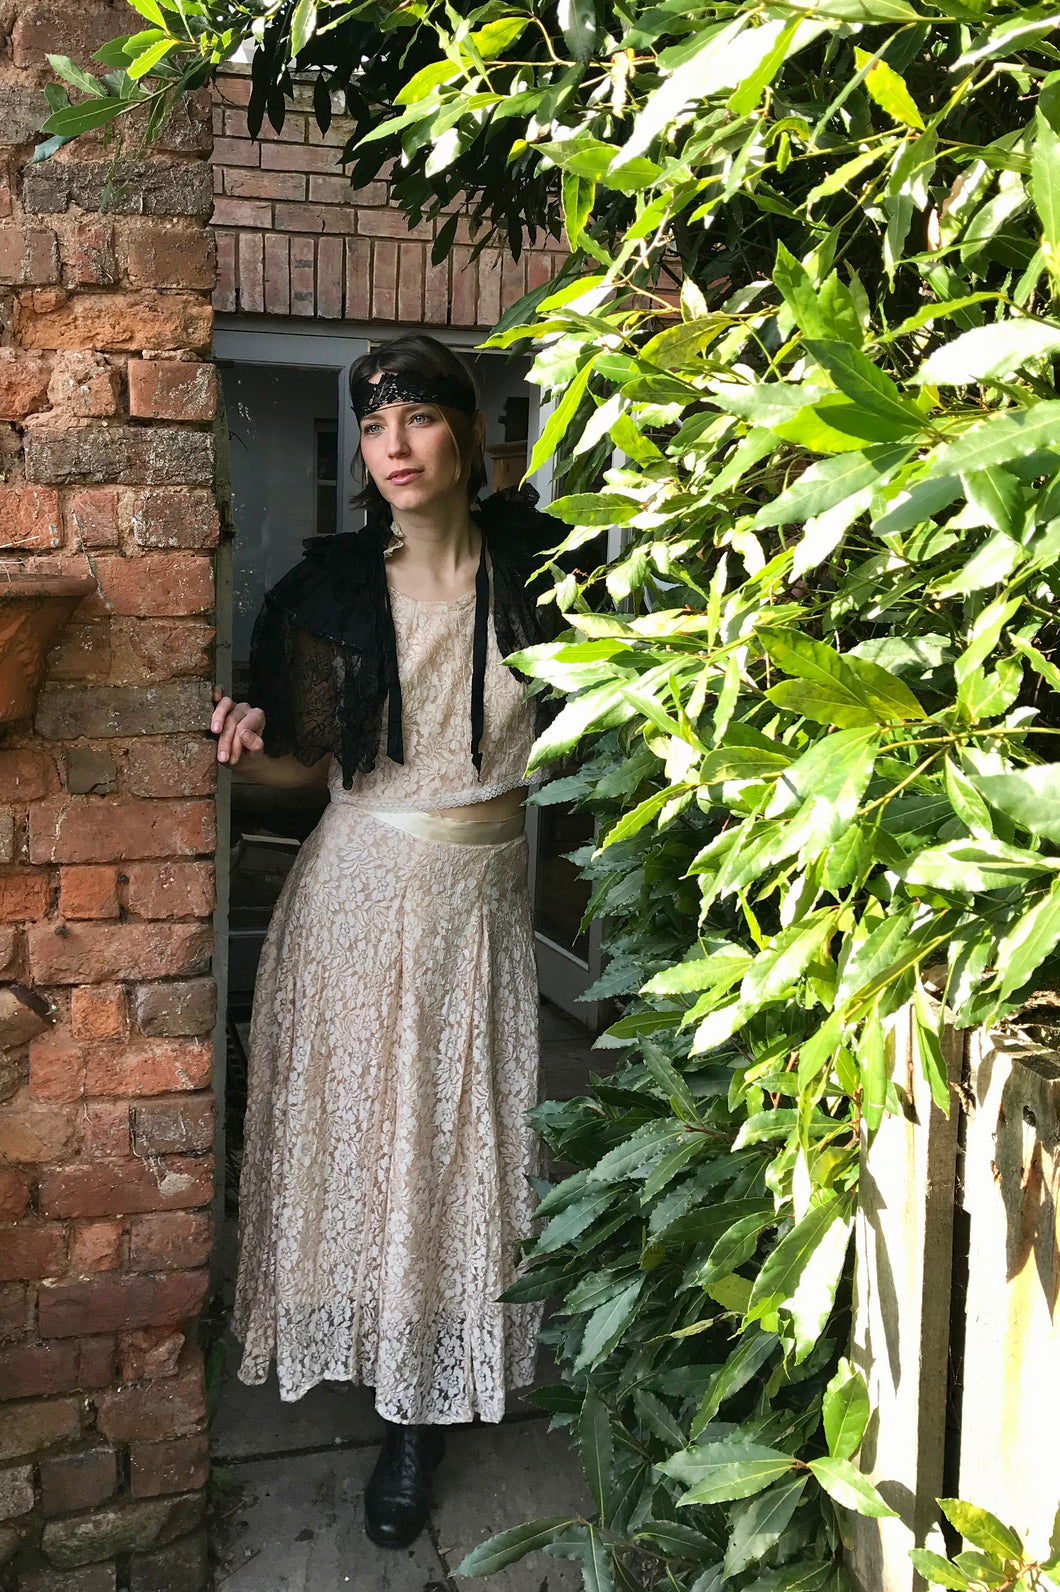 A pretty girl peers through a garden doorway. She is wearing 1940's separates made in shell pink lace. An antique black lace headband and cape complete the Bloomsbury style look. 